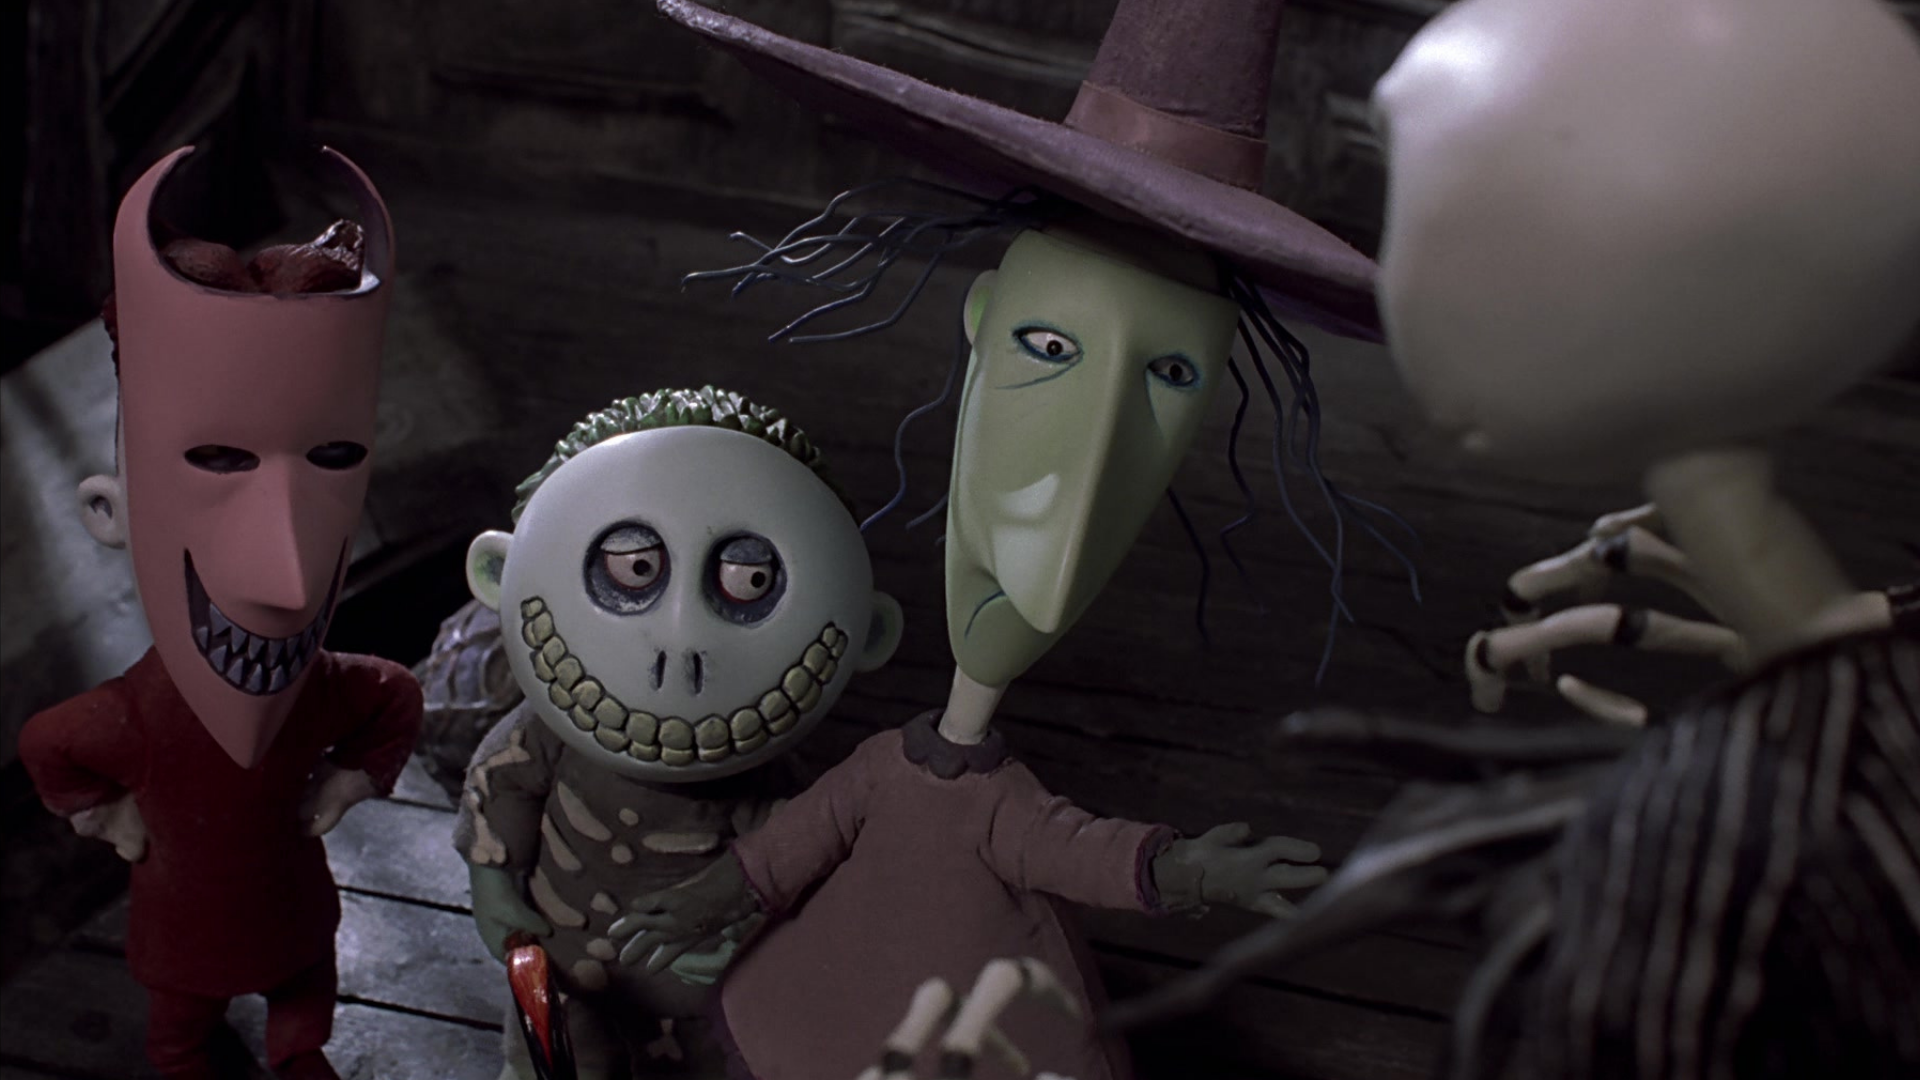 Barrel The Nightmare Before Christmas Jack Skellington Lock The Nightmare Before Christmas Shock The 1920x1080